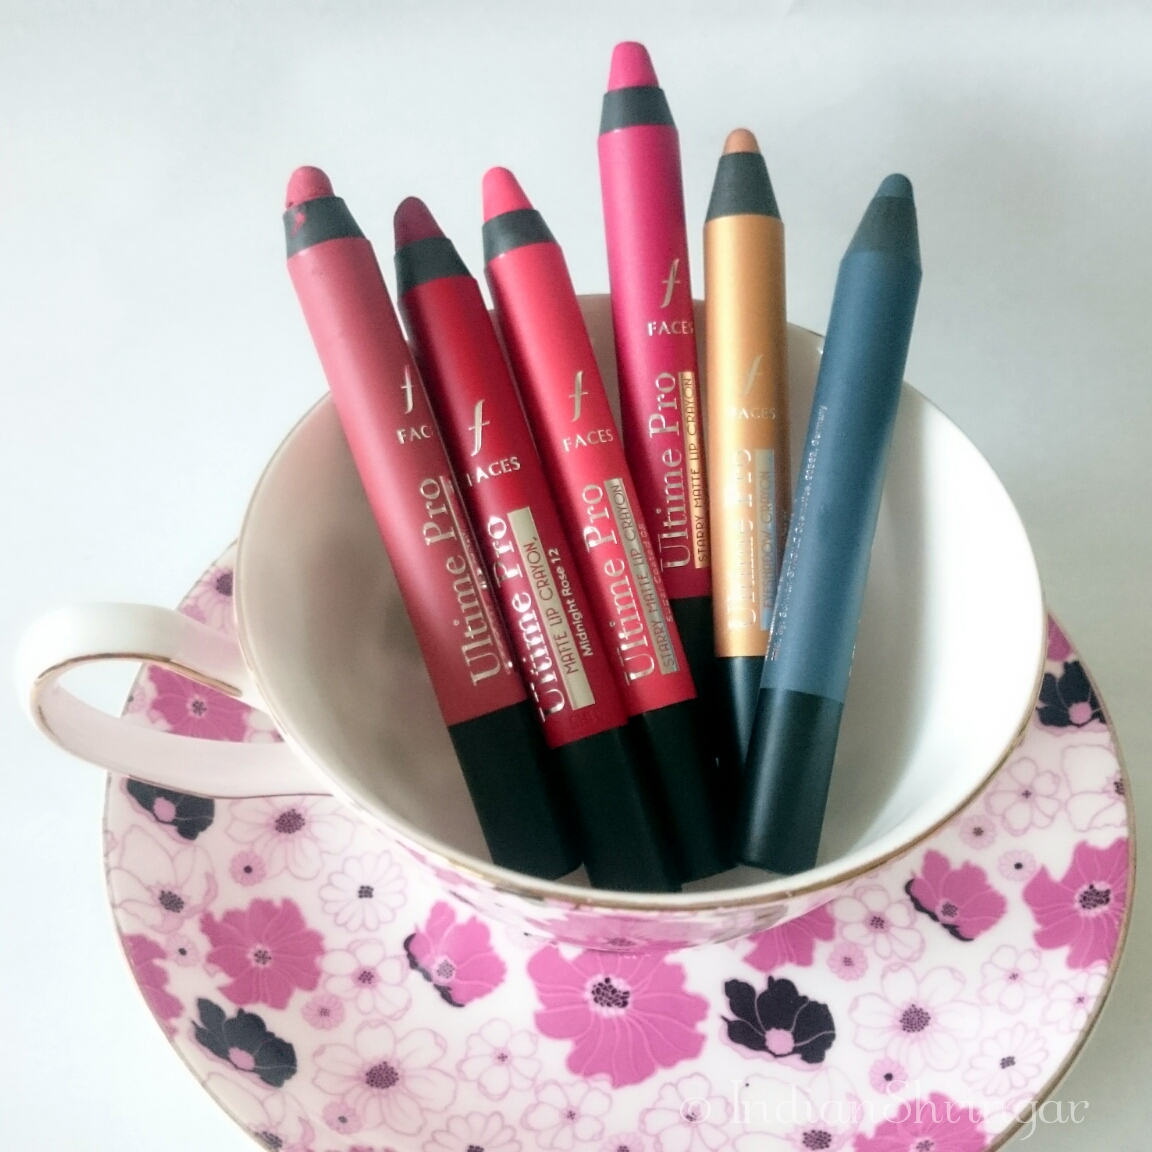 FACES Ultime Pro Lip Crayon and Eye Crayon review and swatches